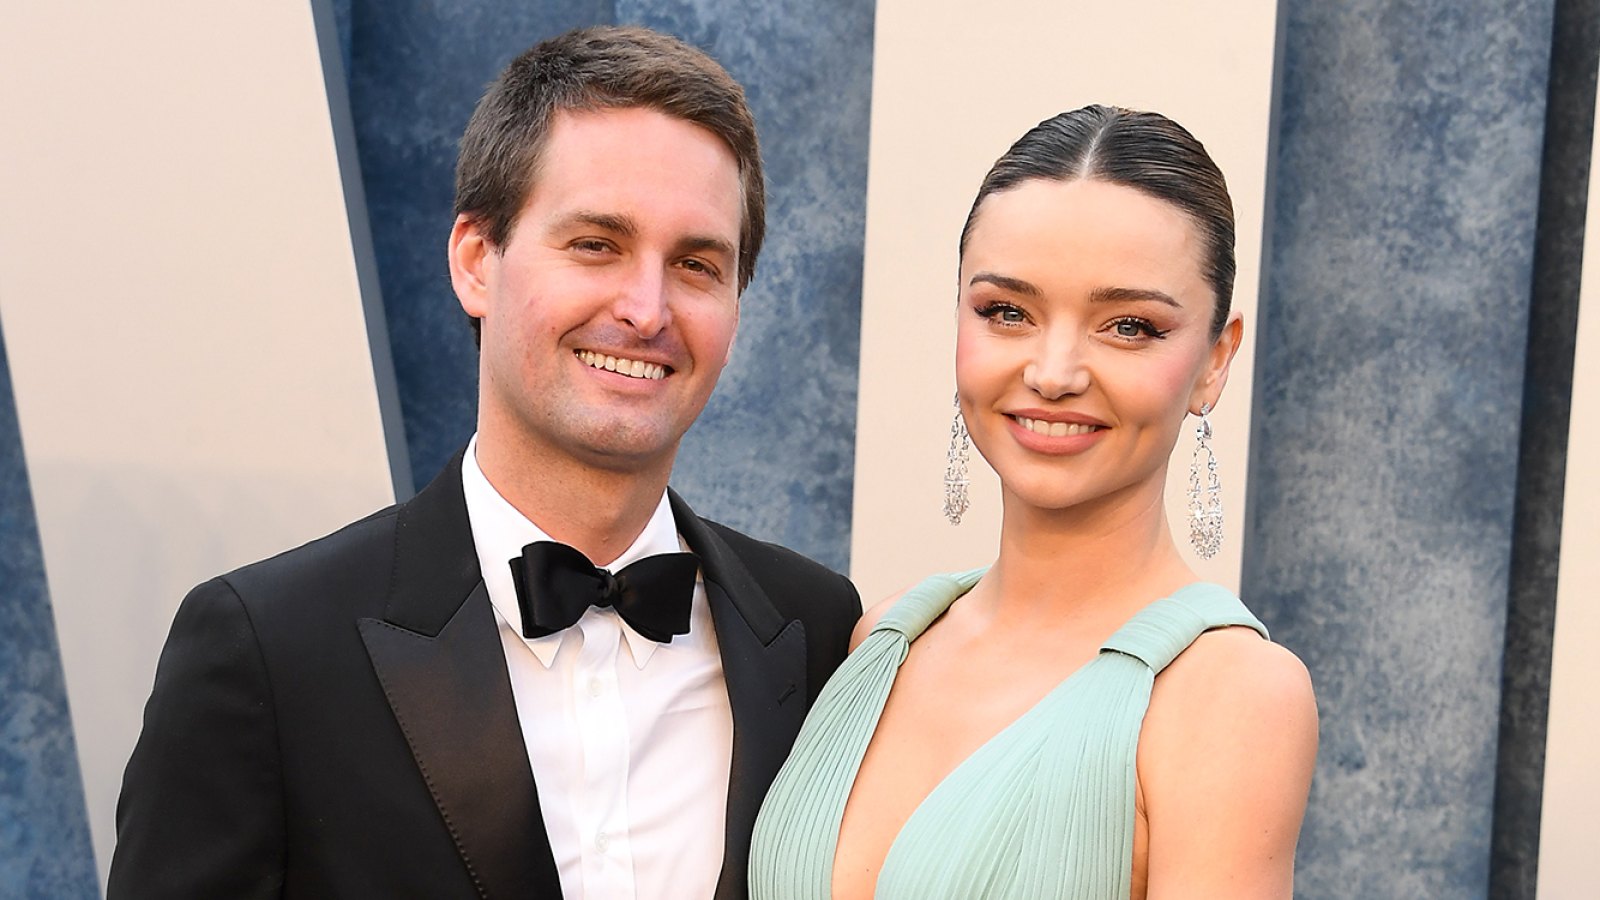 Miranda Kerr Gives Birth to Baby No. 4, Her 3rd With Husband Evan Spiegel